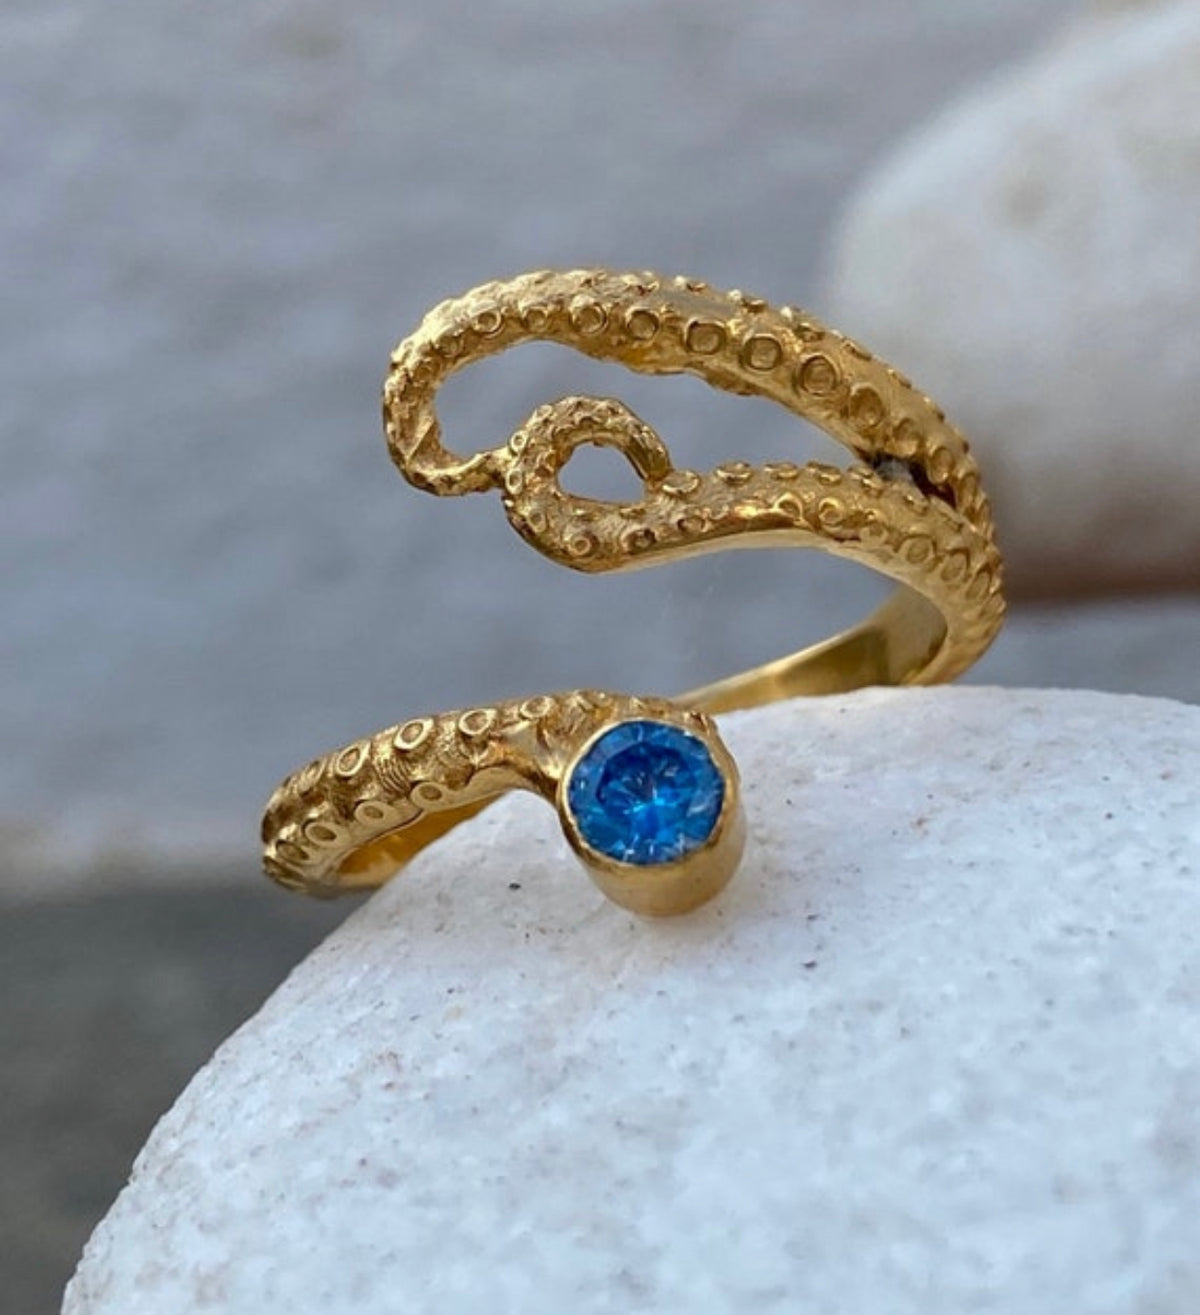 Octopus ring gold and blue gemstone, gold tentacle ring